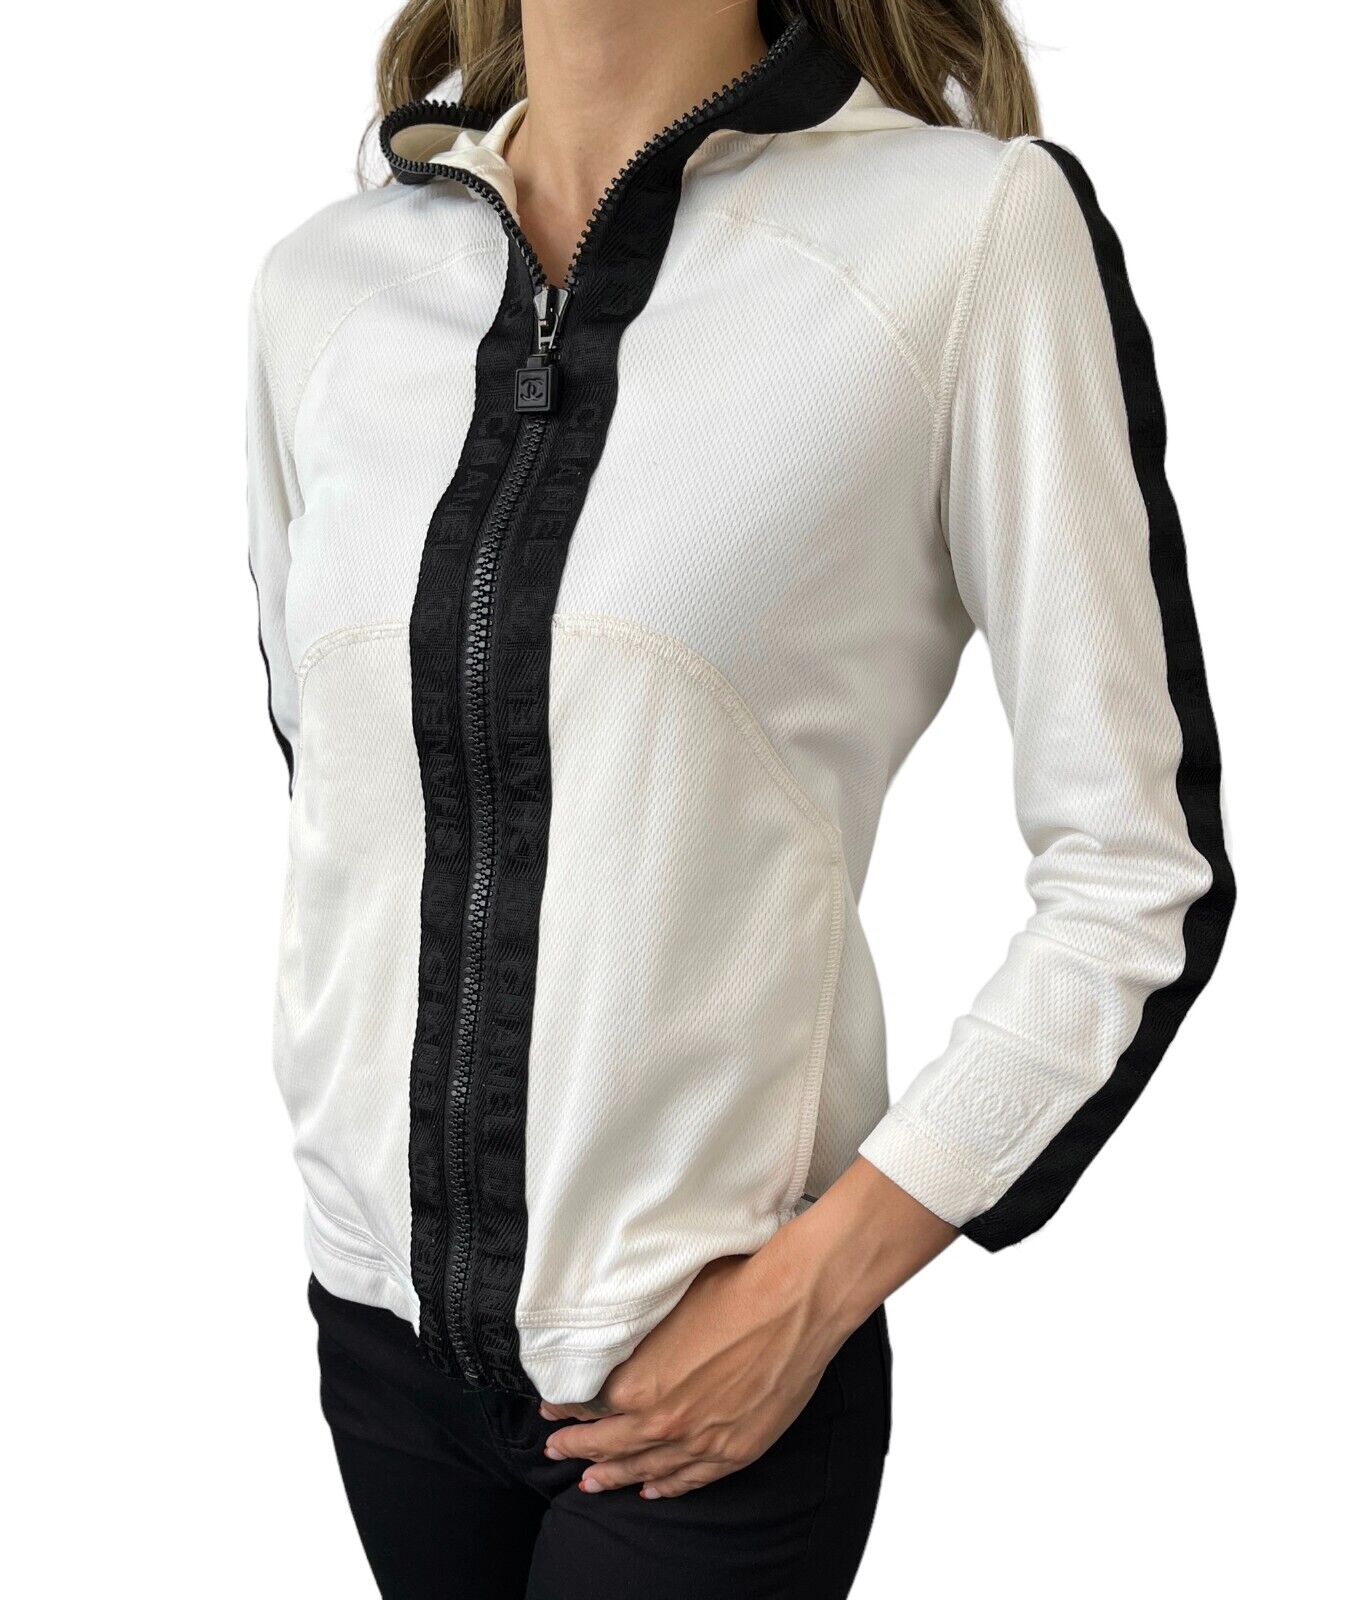 Coco Chanel' Women's Hoodie